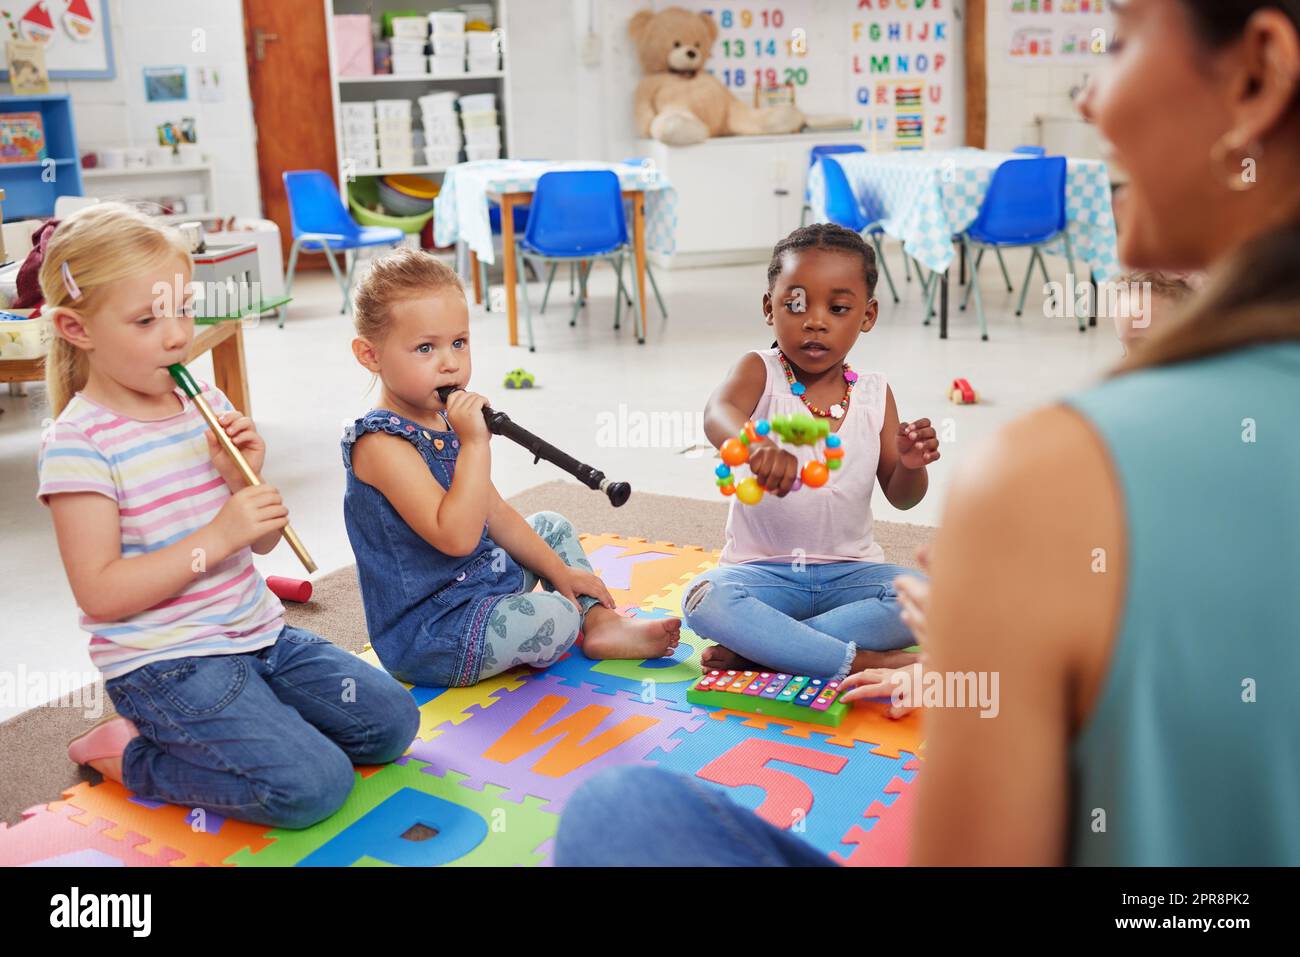 Musical instruments helps the body and mind work together. children learning about musical instruments in class. Stock Photo